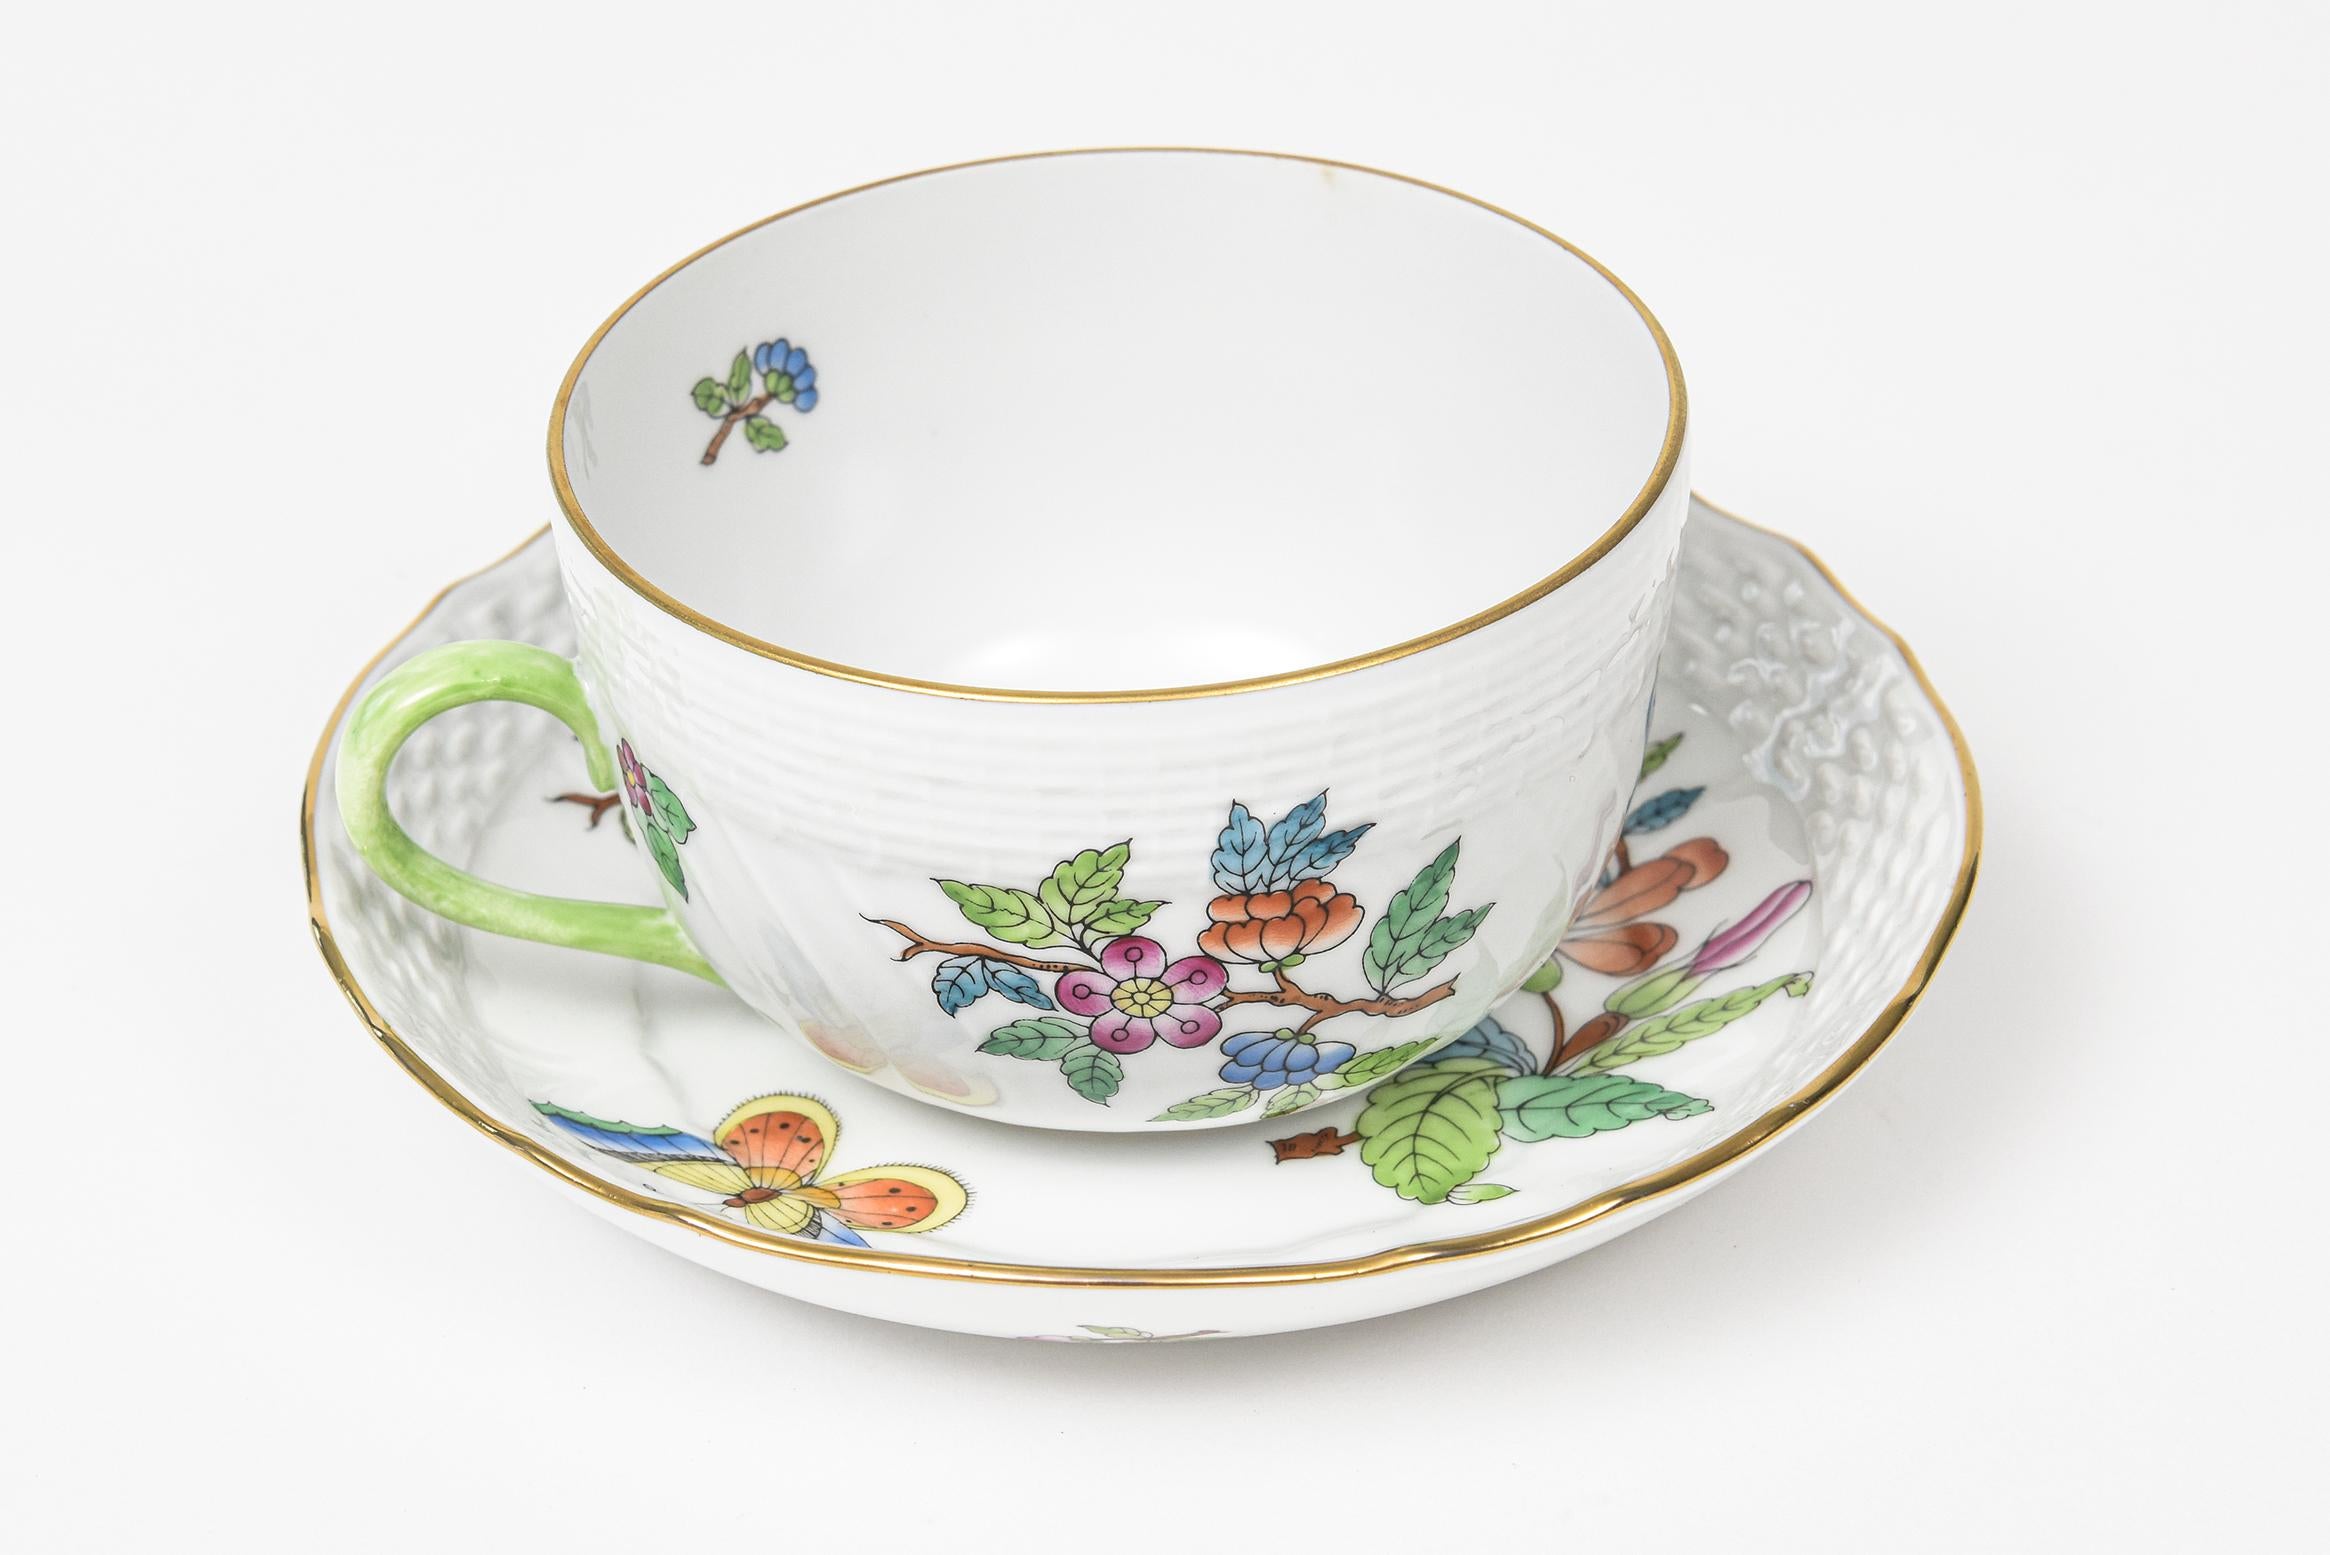 queen victoria china pattern